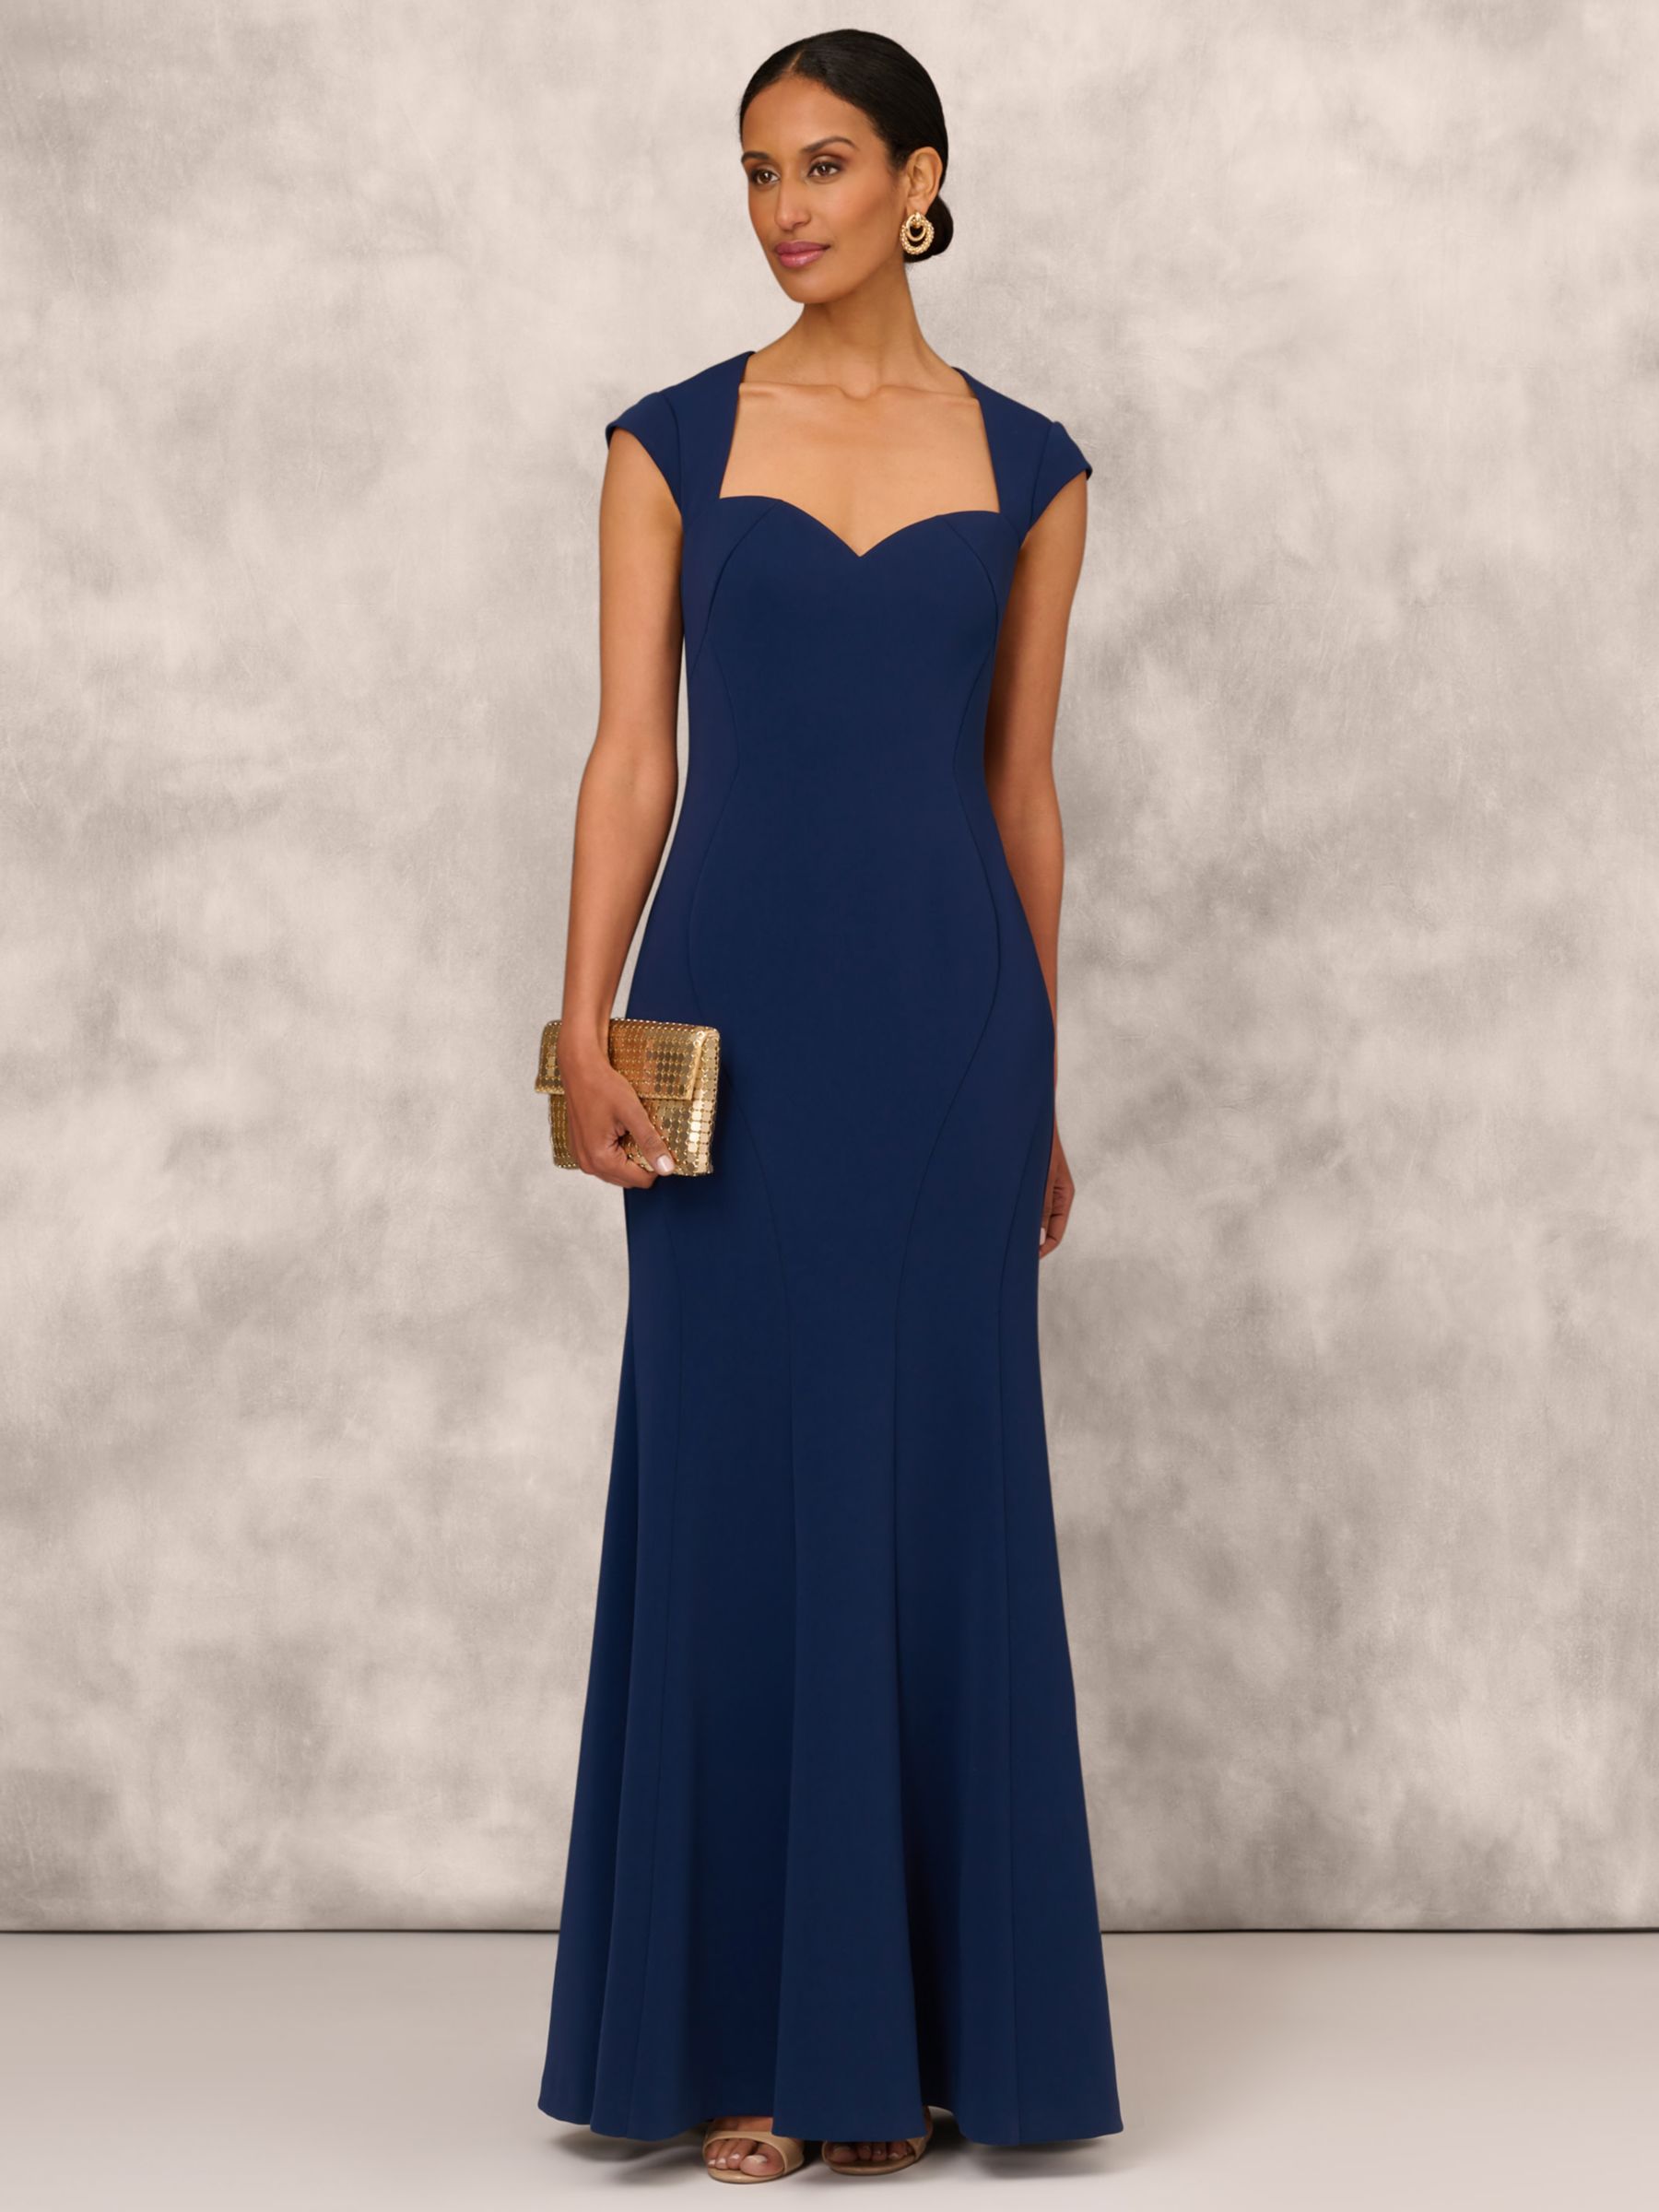 Buy Adrianna Papell Aidan Mattox by Adrianna Papell Cap Sleeve Gown, Twilight Online at johnlewis.com